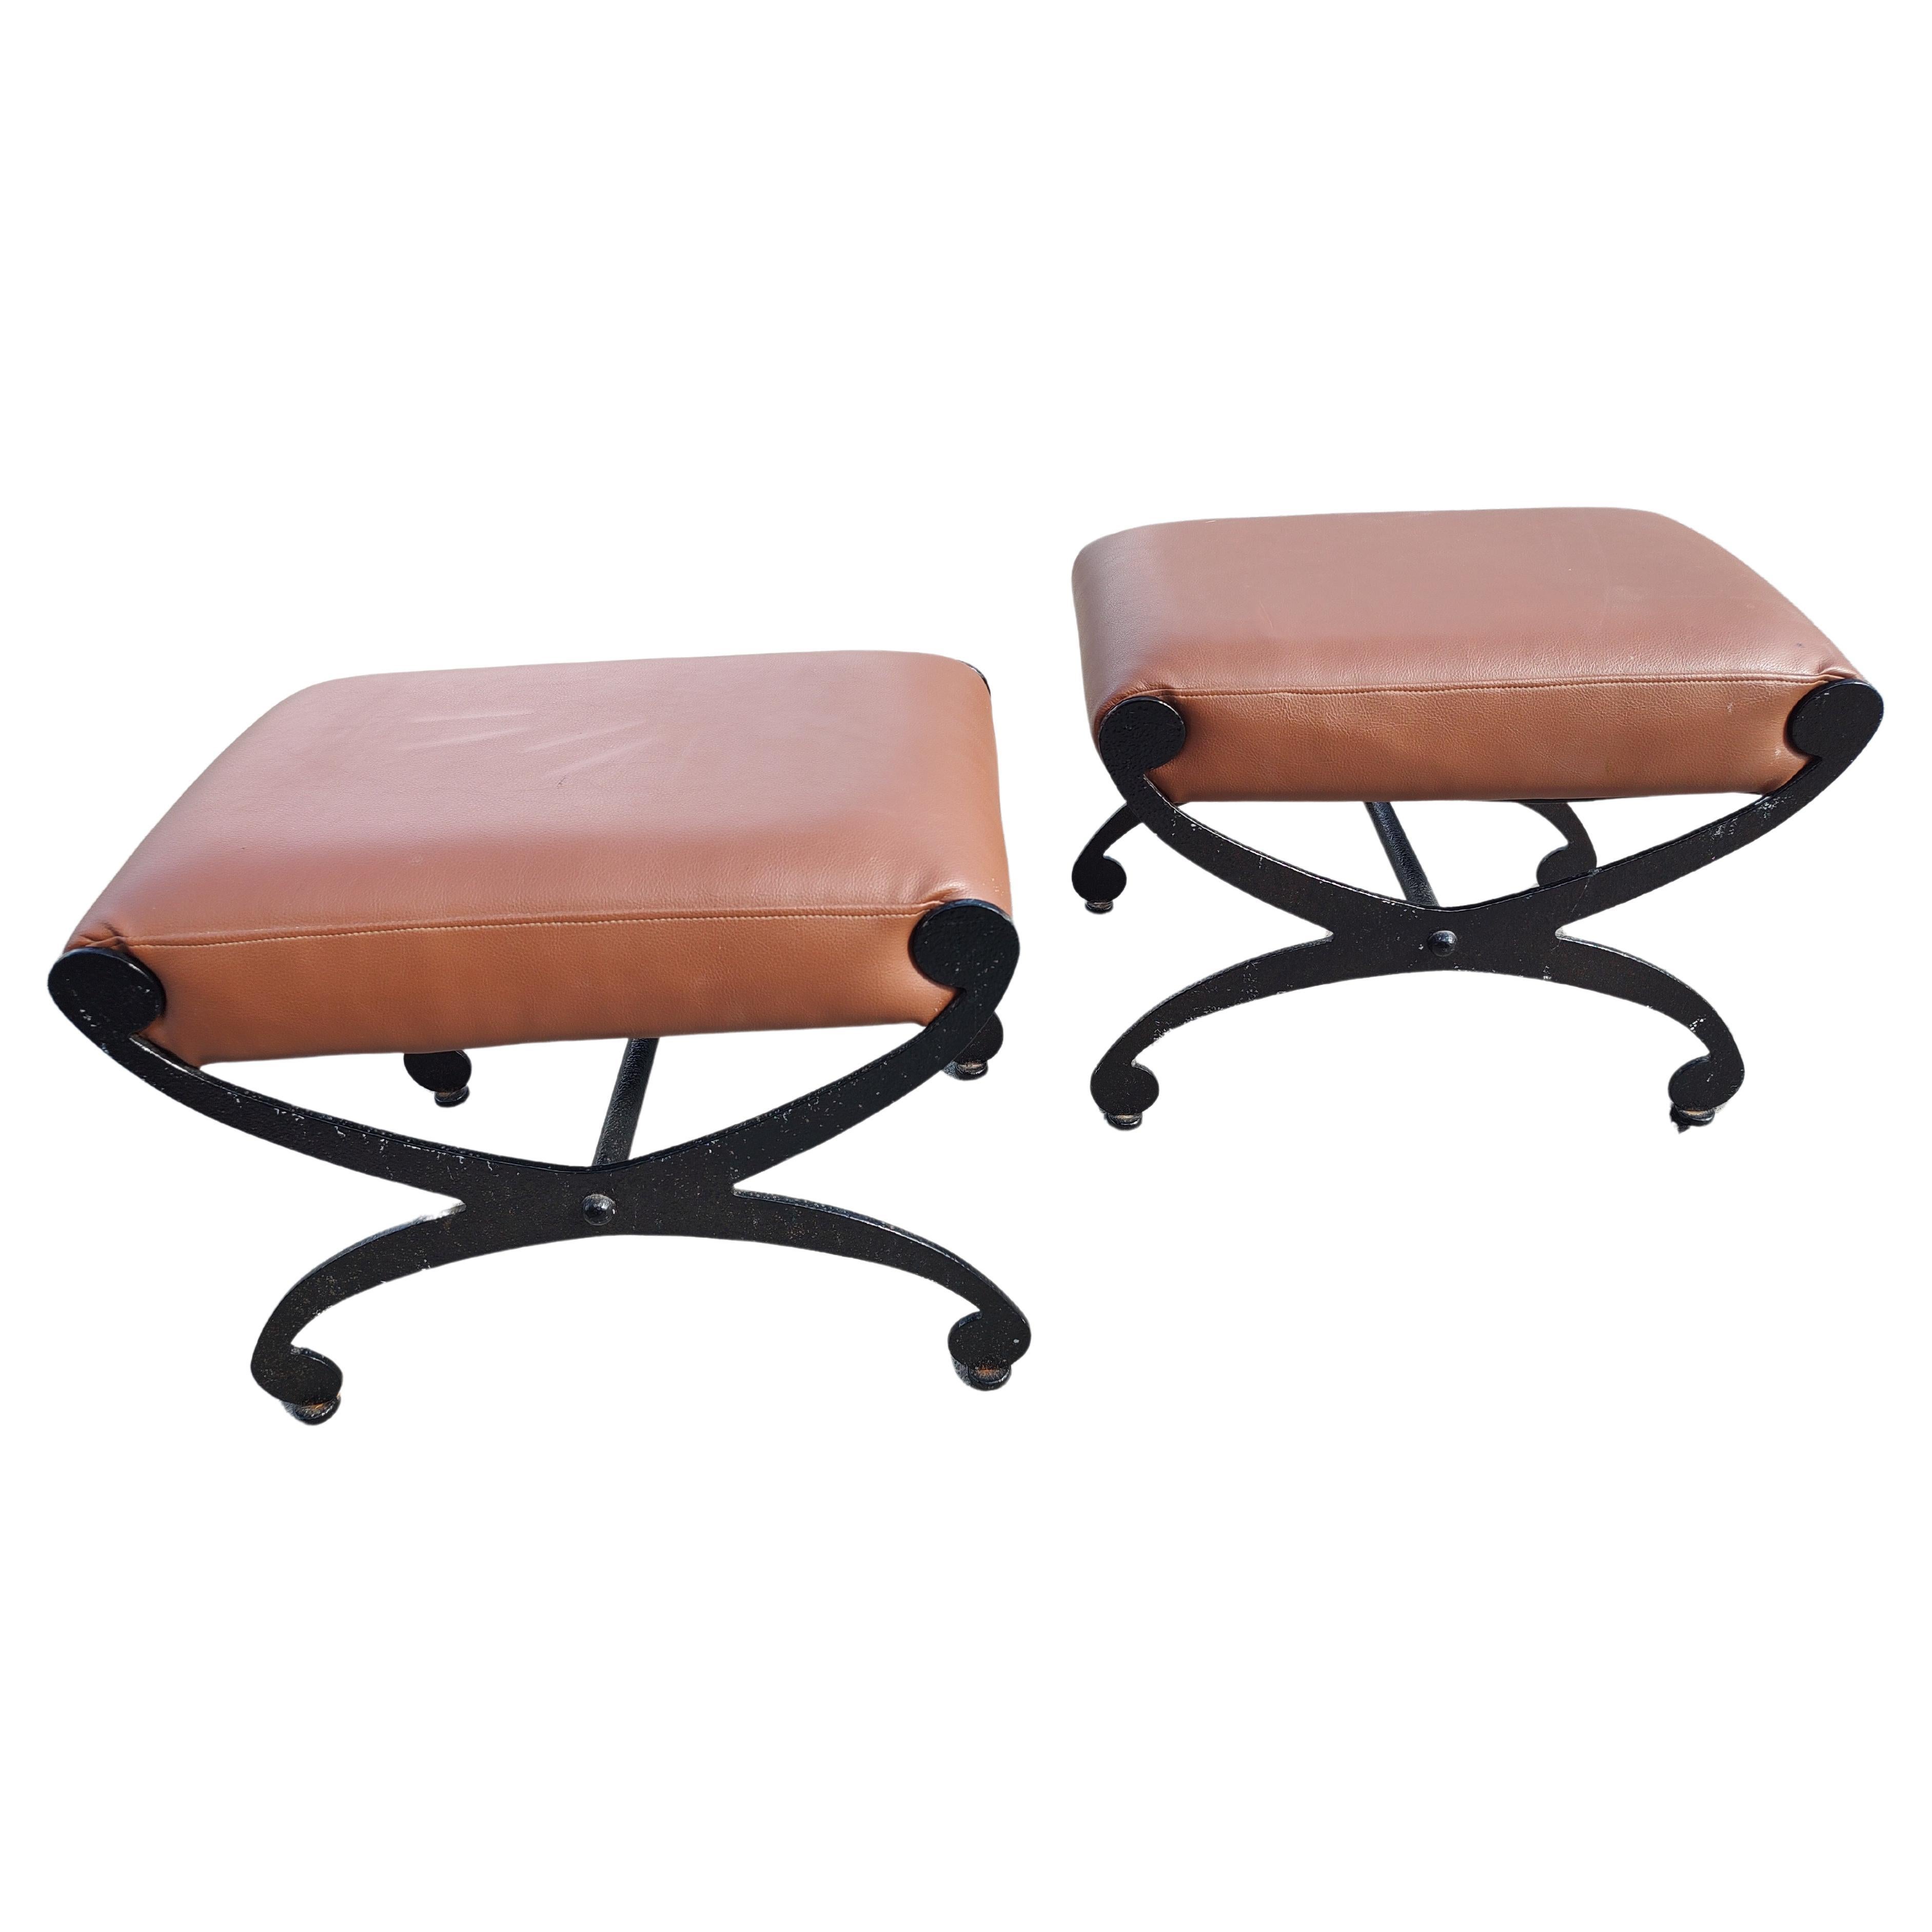 Pair of Mid Century Modern Cast Iron with Brown Naughahyde Ottomans  For Sale 1